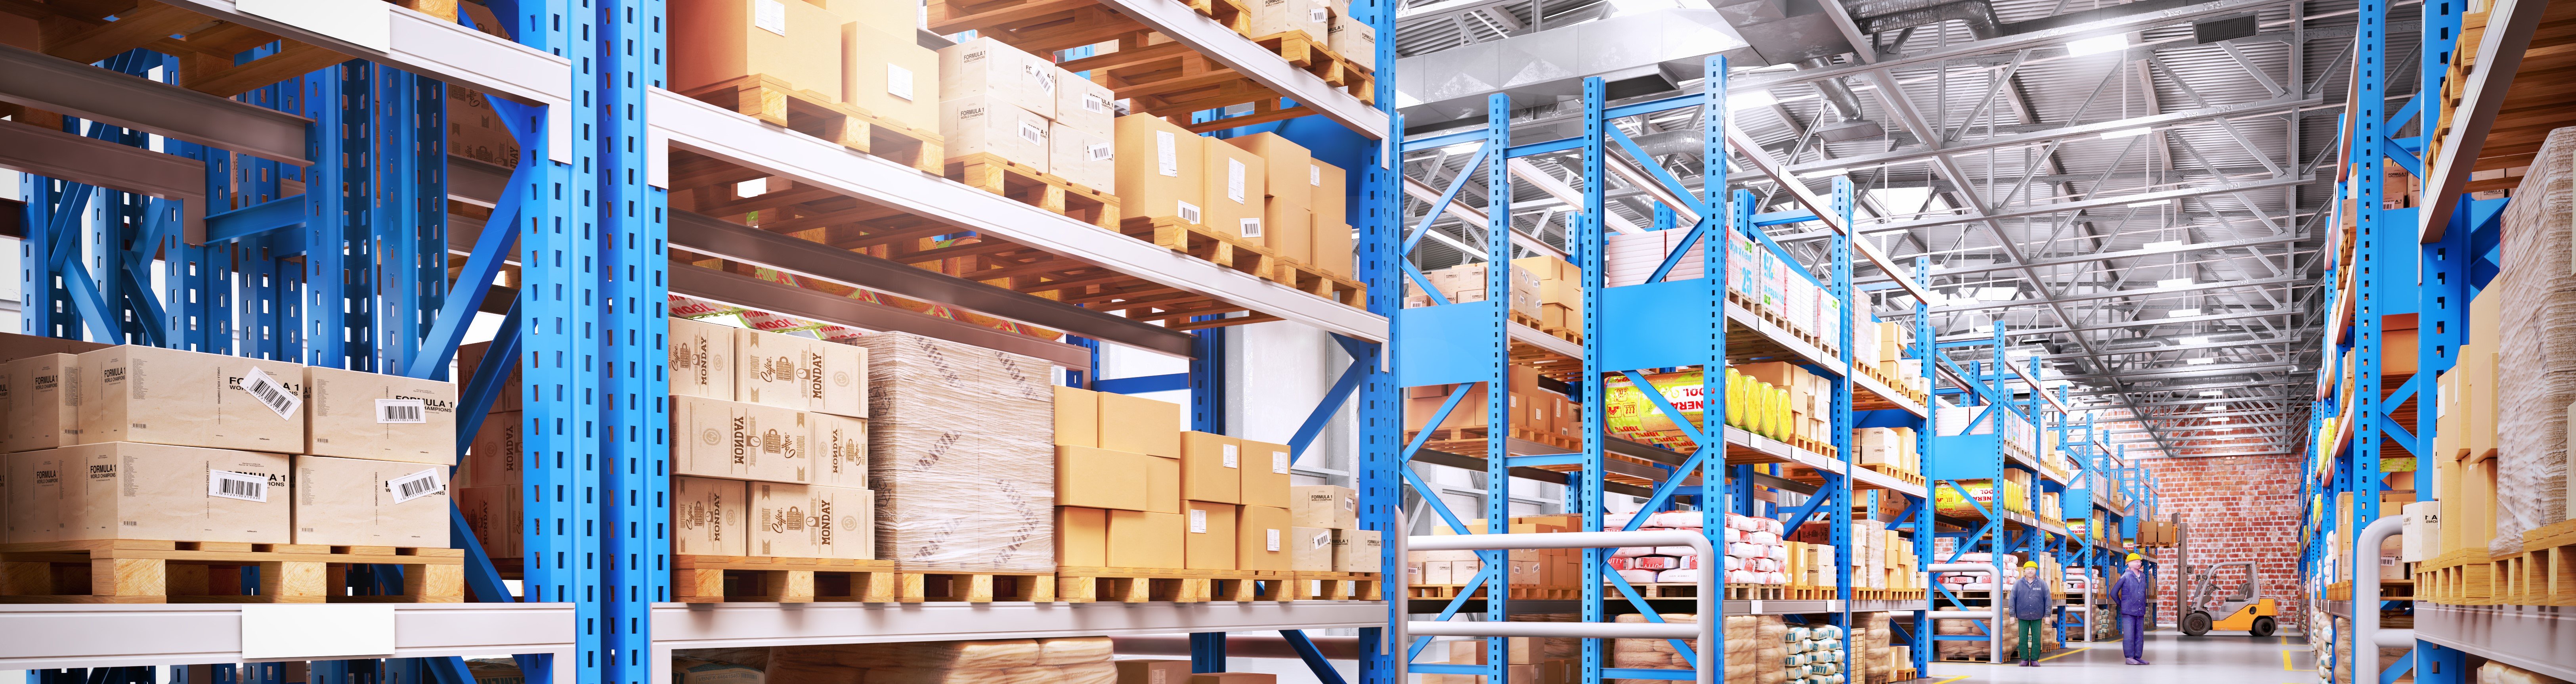 Utilize a sophisticated warehouse management solution to boost productivity with SAP Business One Cloud ERP Software on the Stellar One Cloud Platform